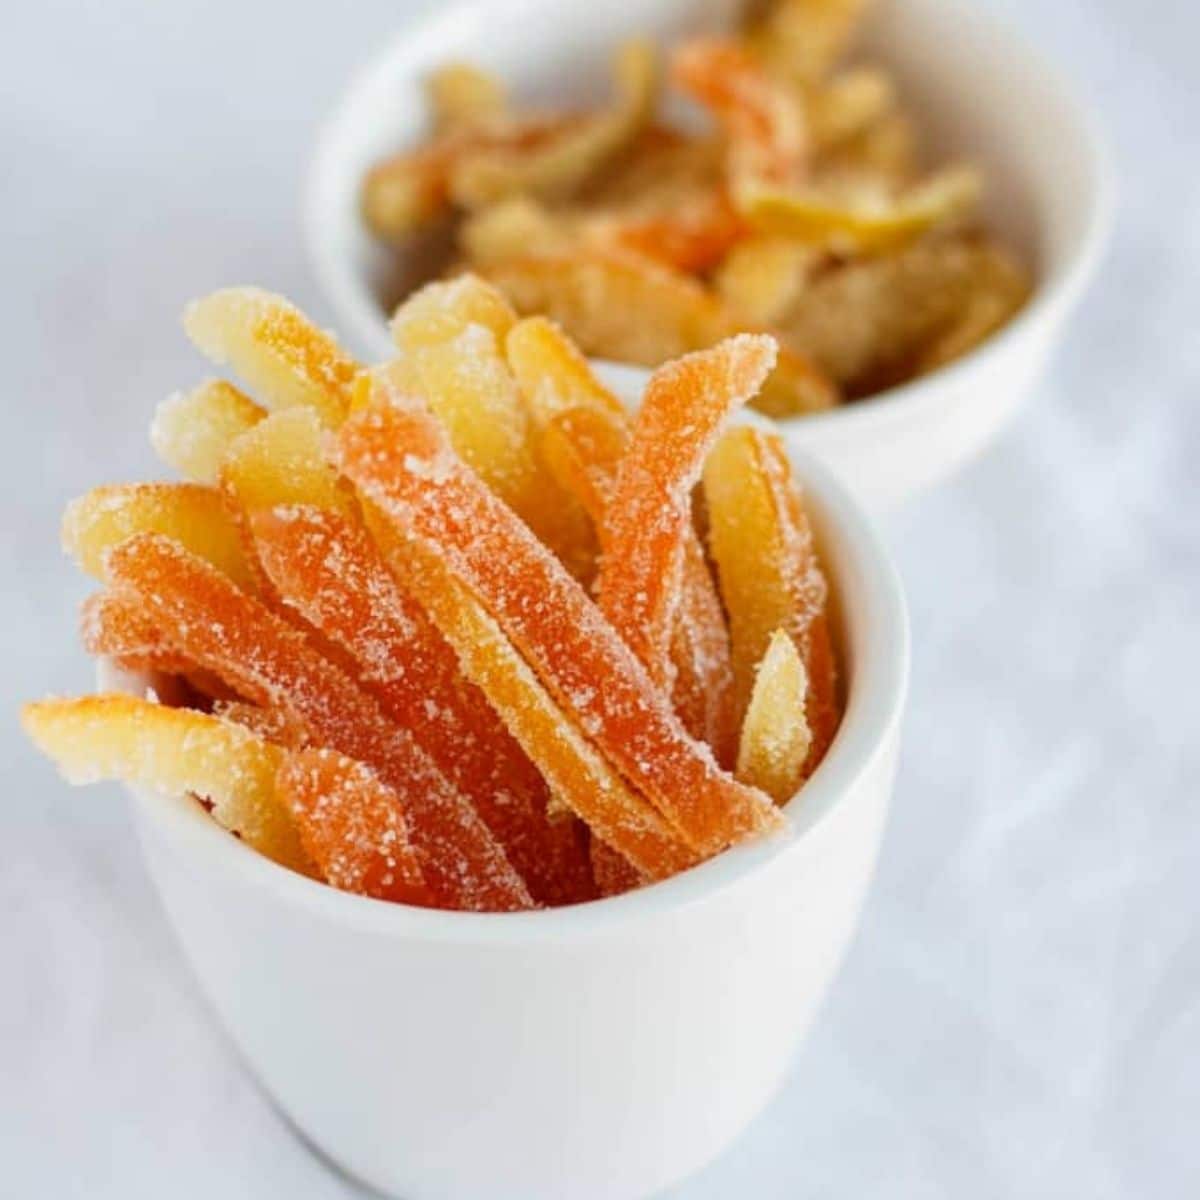 https://thecookiewriter.com/wp-content/uploads/2015/11/homemade-candied-citrus-peels-featured.jpg